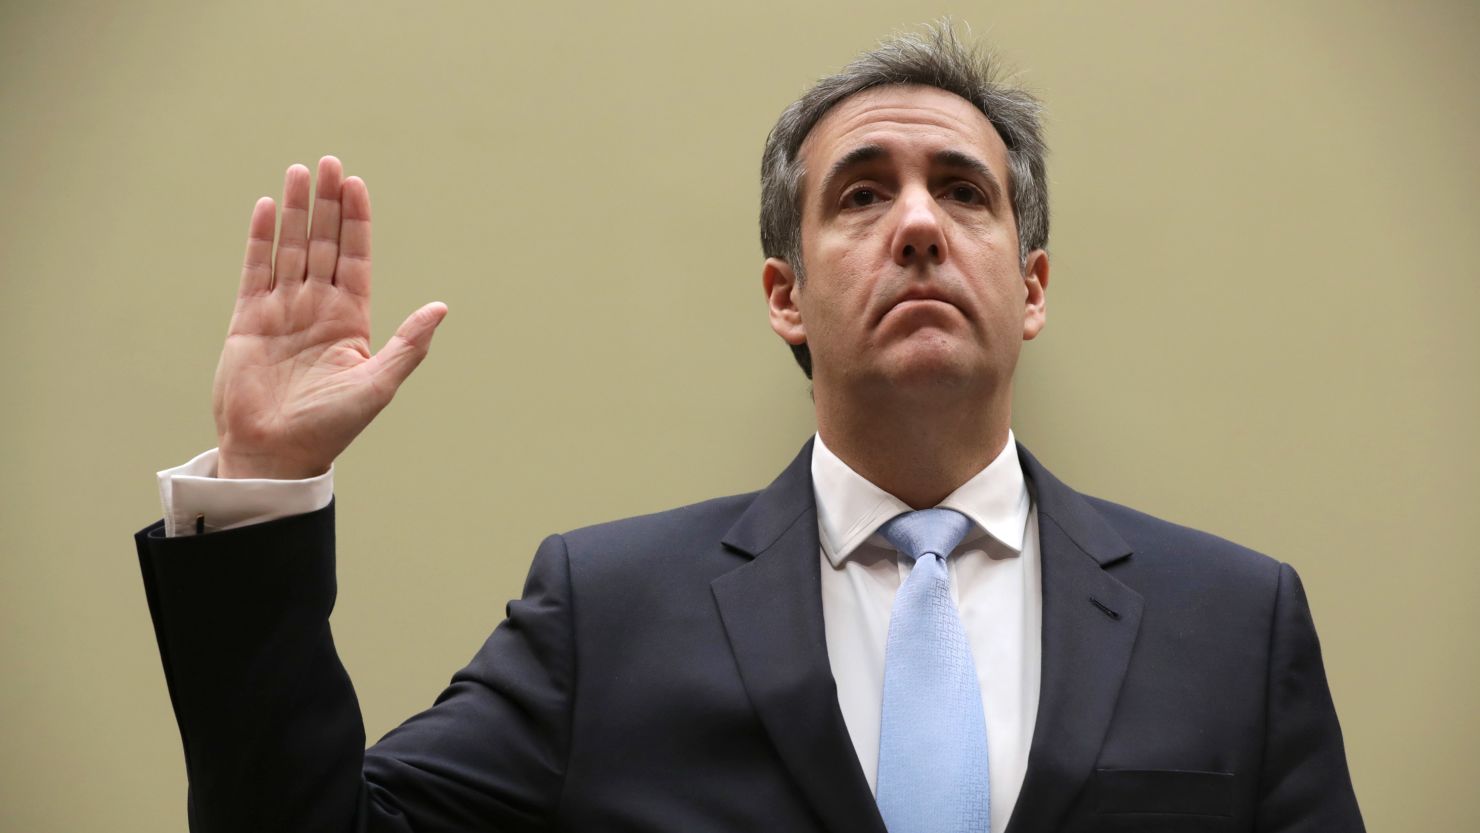 In this February 27, 2019, file photo, Michael Cohen is sworn in before testifying before the House Oversight Committee on Capitol Hill  in Washington.